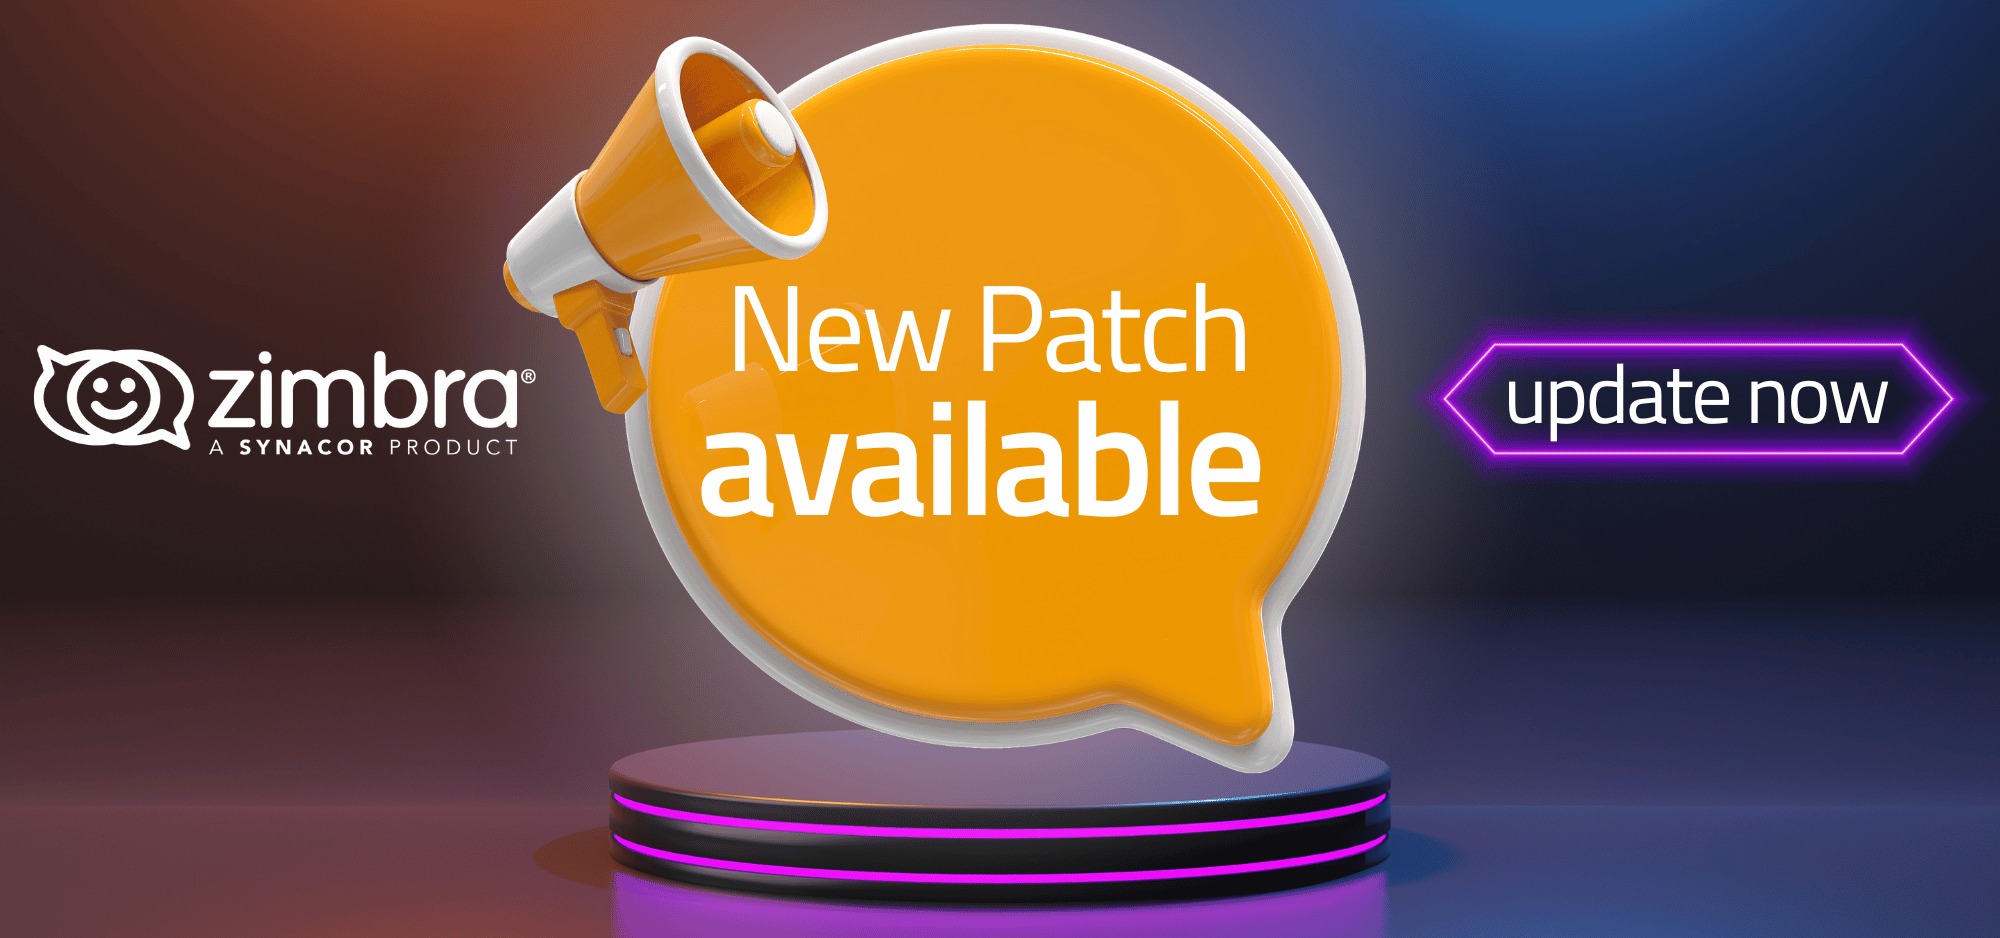 NEW! Patch Release For Deprecated Files Deletion, OpenJDK Security Enhancement, Migration Support to Zimbra Daffodil (v10)